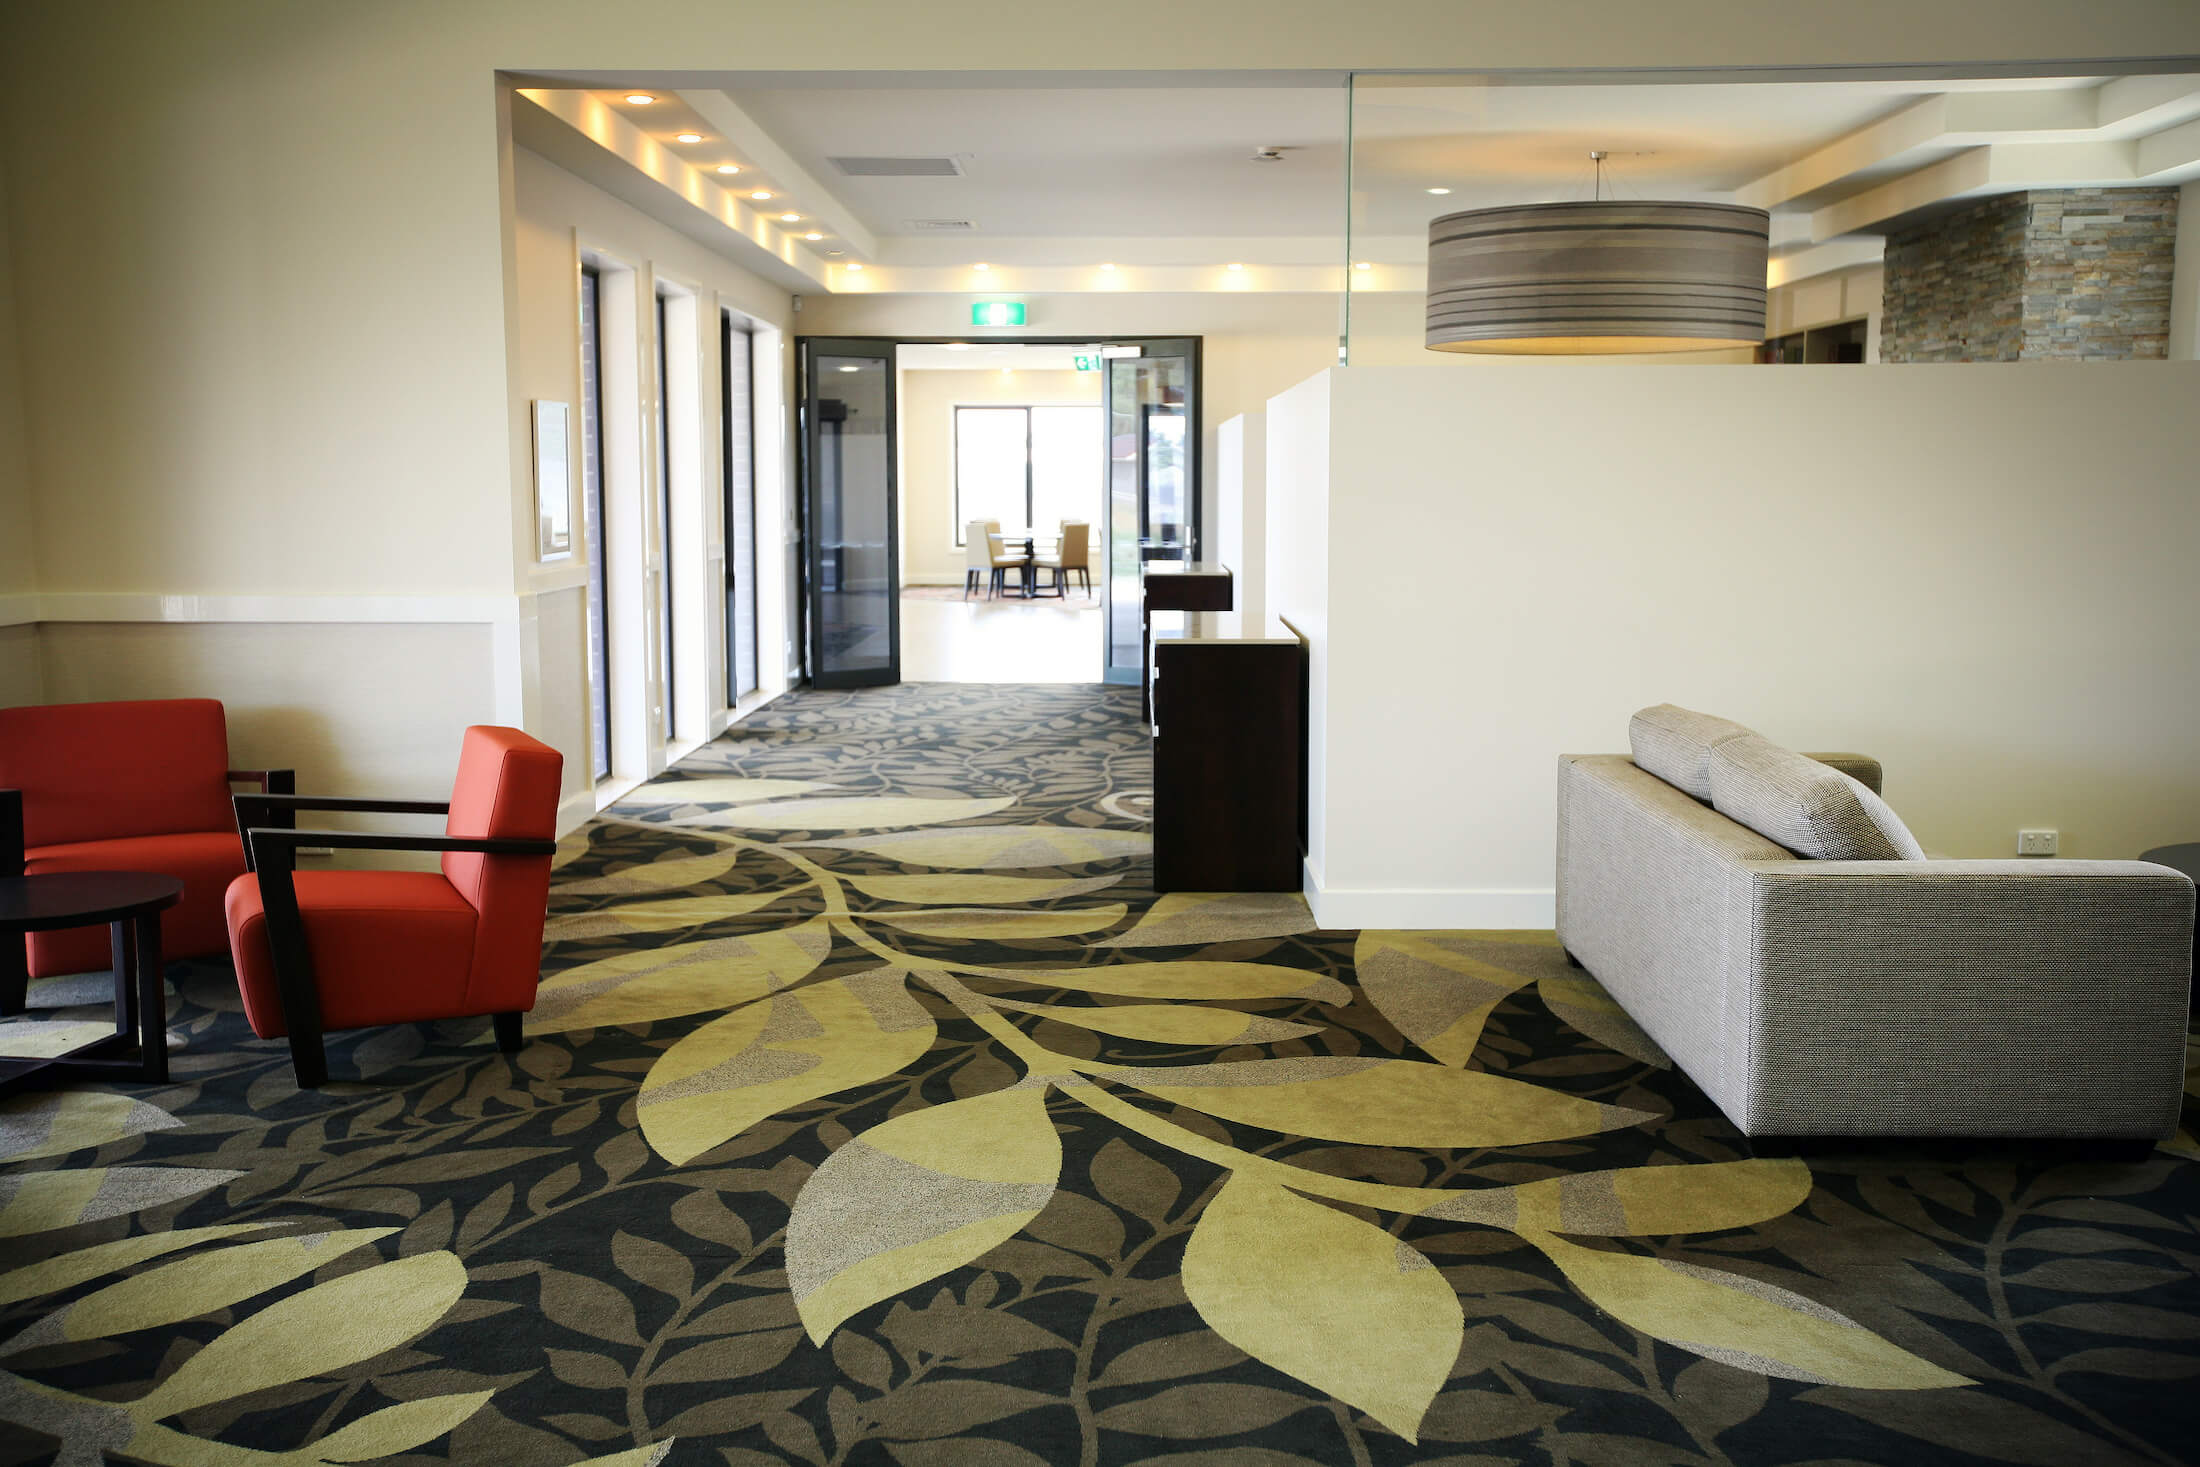 Retirement village lounge areas and entry beyond